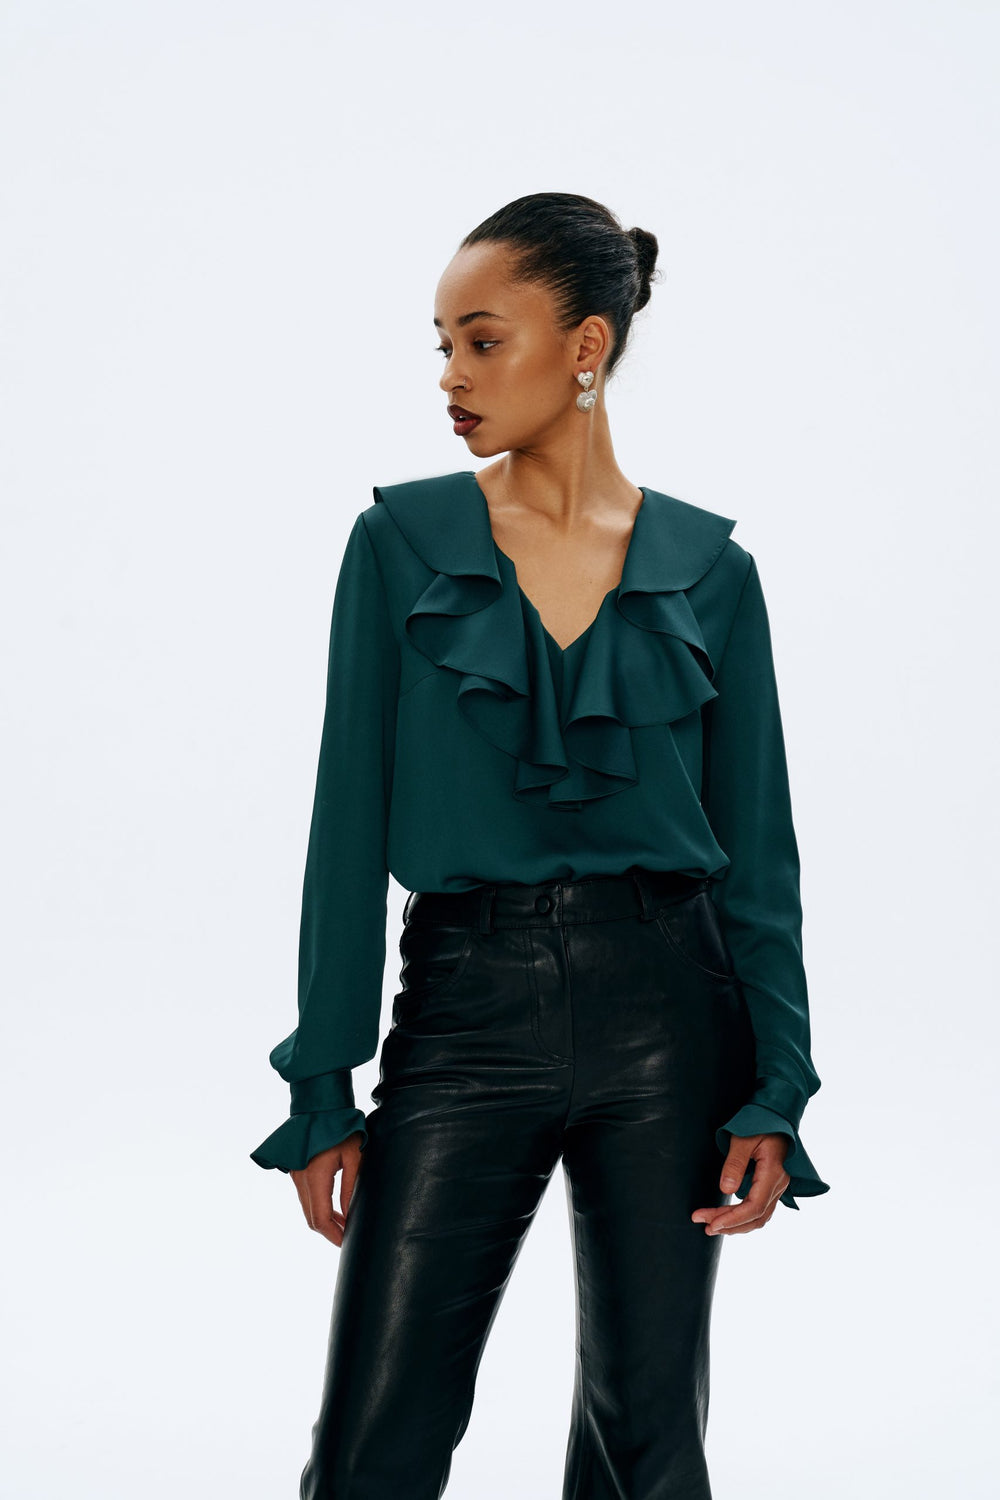 Woman wearing the Bertha Blouse sewing pattern from Vikisews on The Fold Line. A blouse pattern made in natural silk, artificial silk, chiffon, crepe de chine, organza or silk crepe fabrics, featuring a semi-fit, straight silhouette, bust darts, back shou